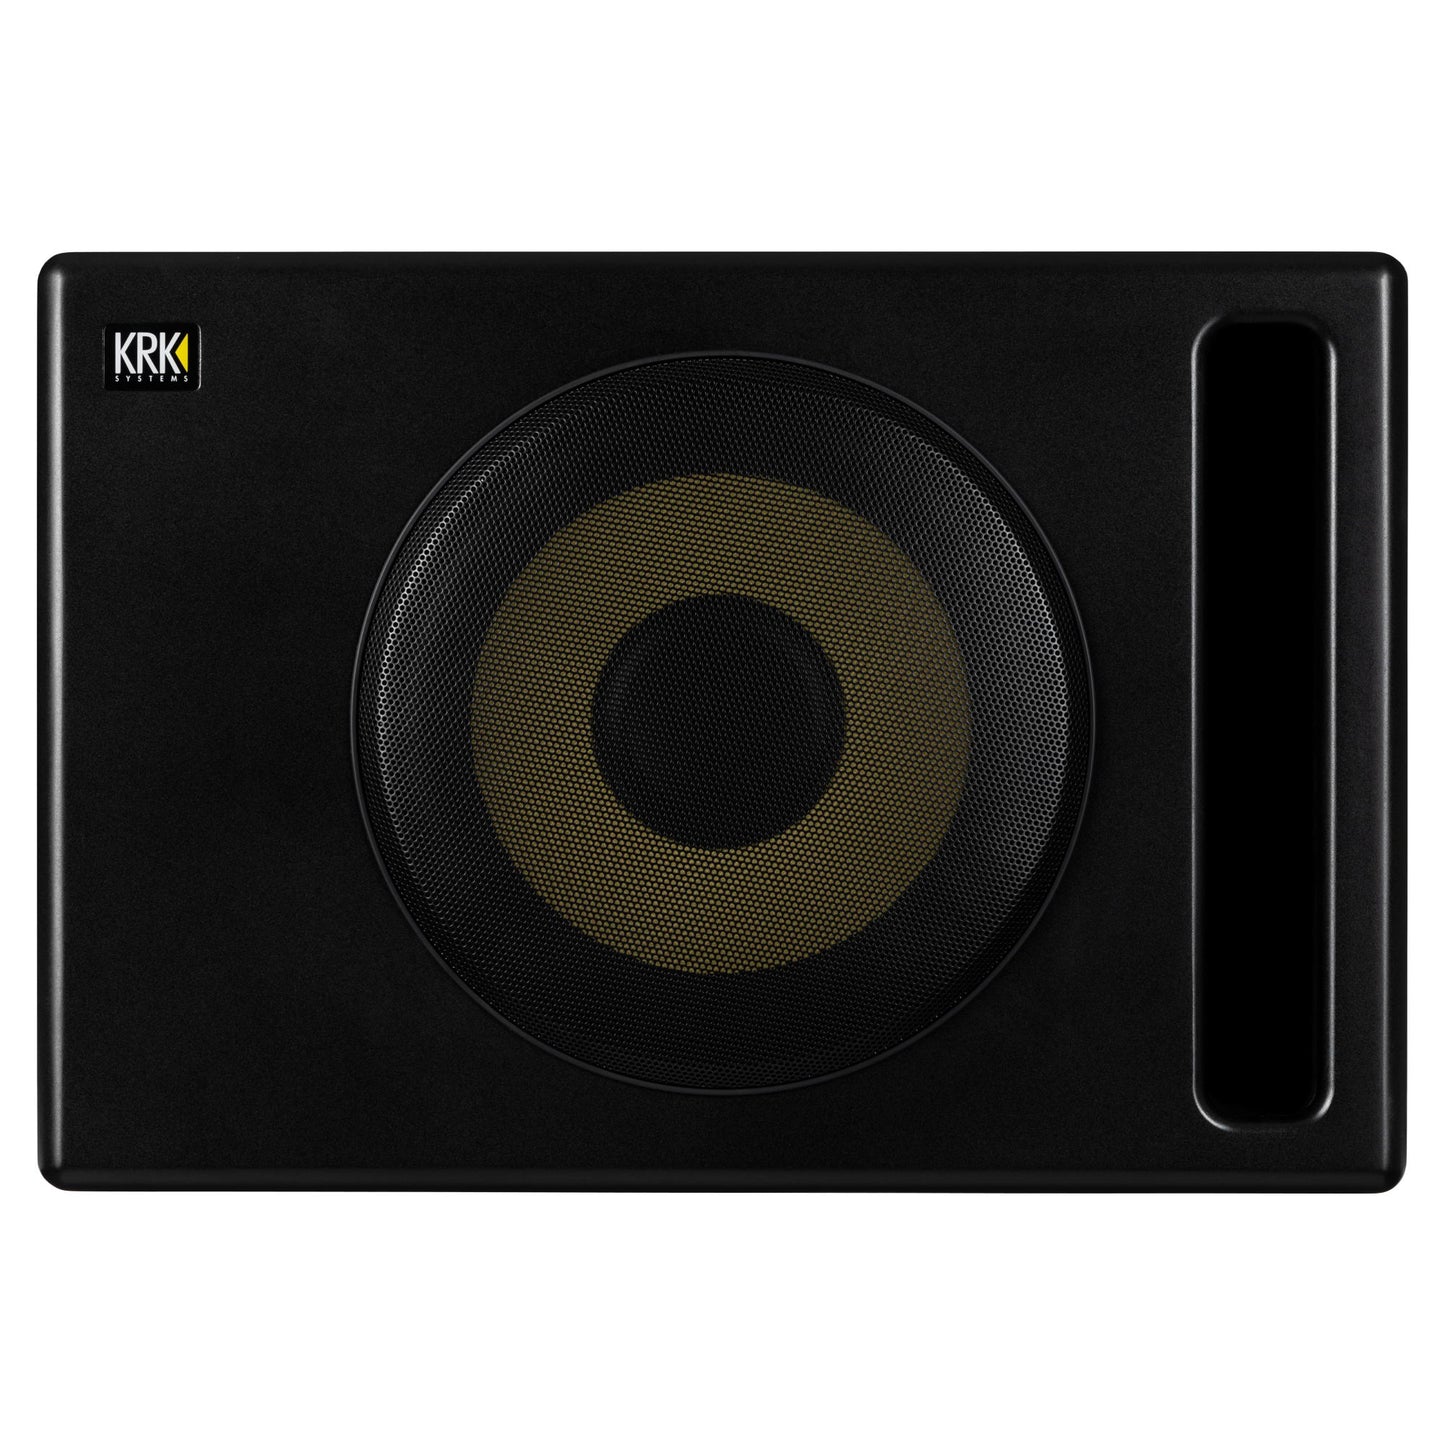 KRK S12.4 Powered Studio Subwoofer - with Grille